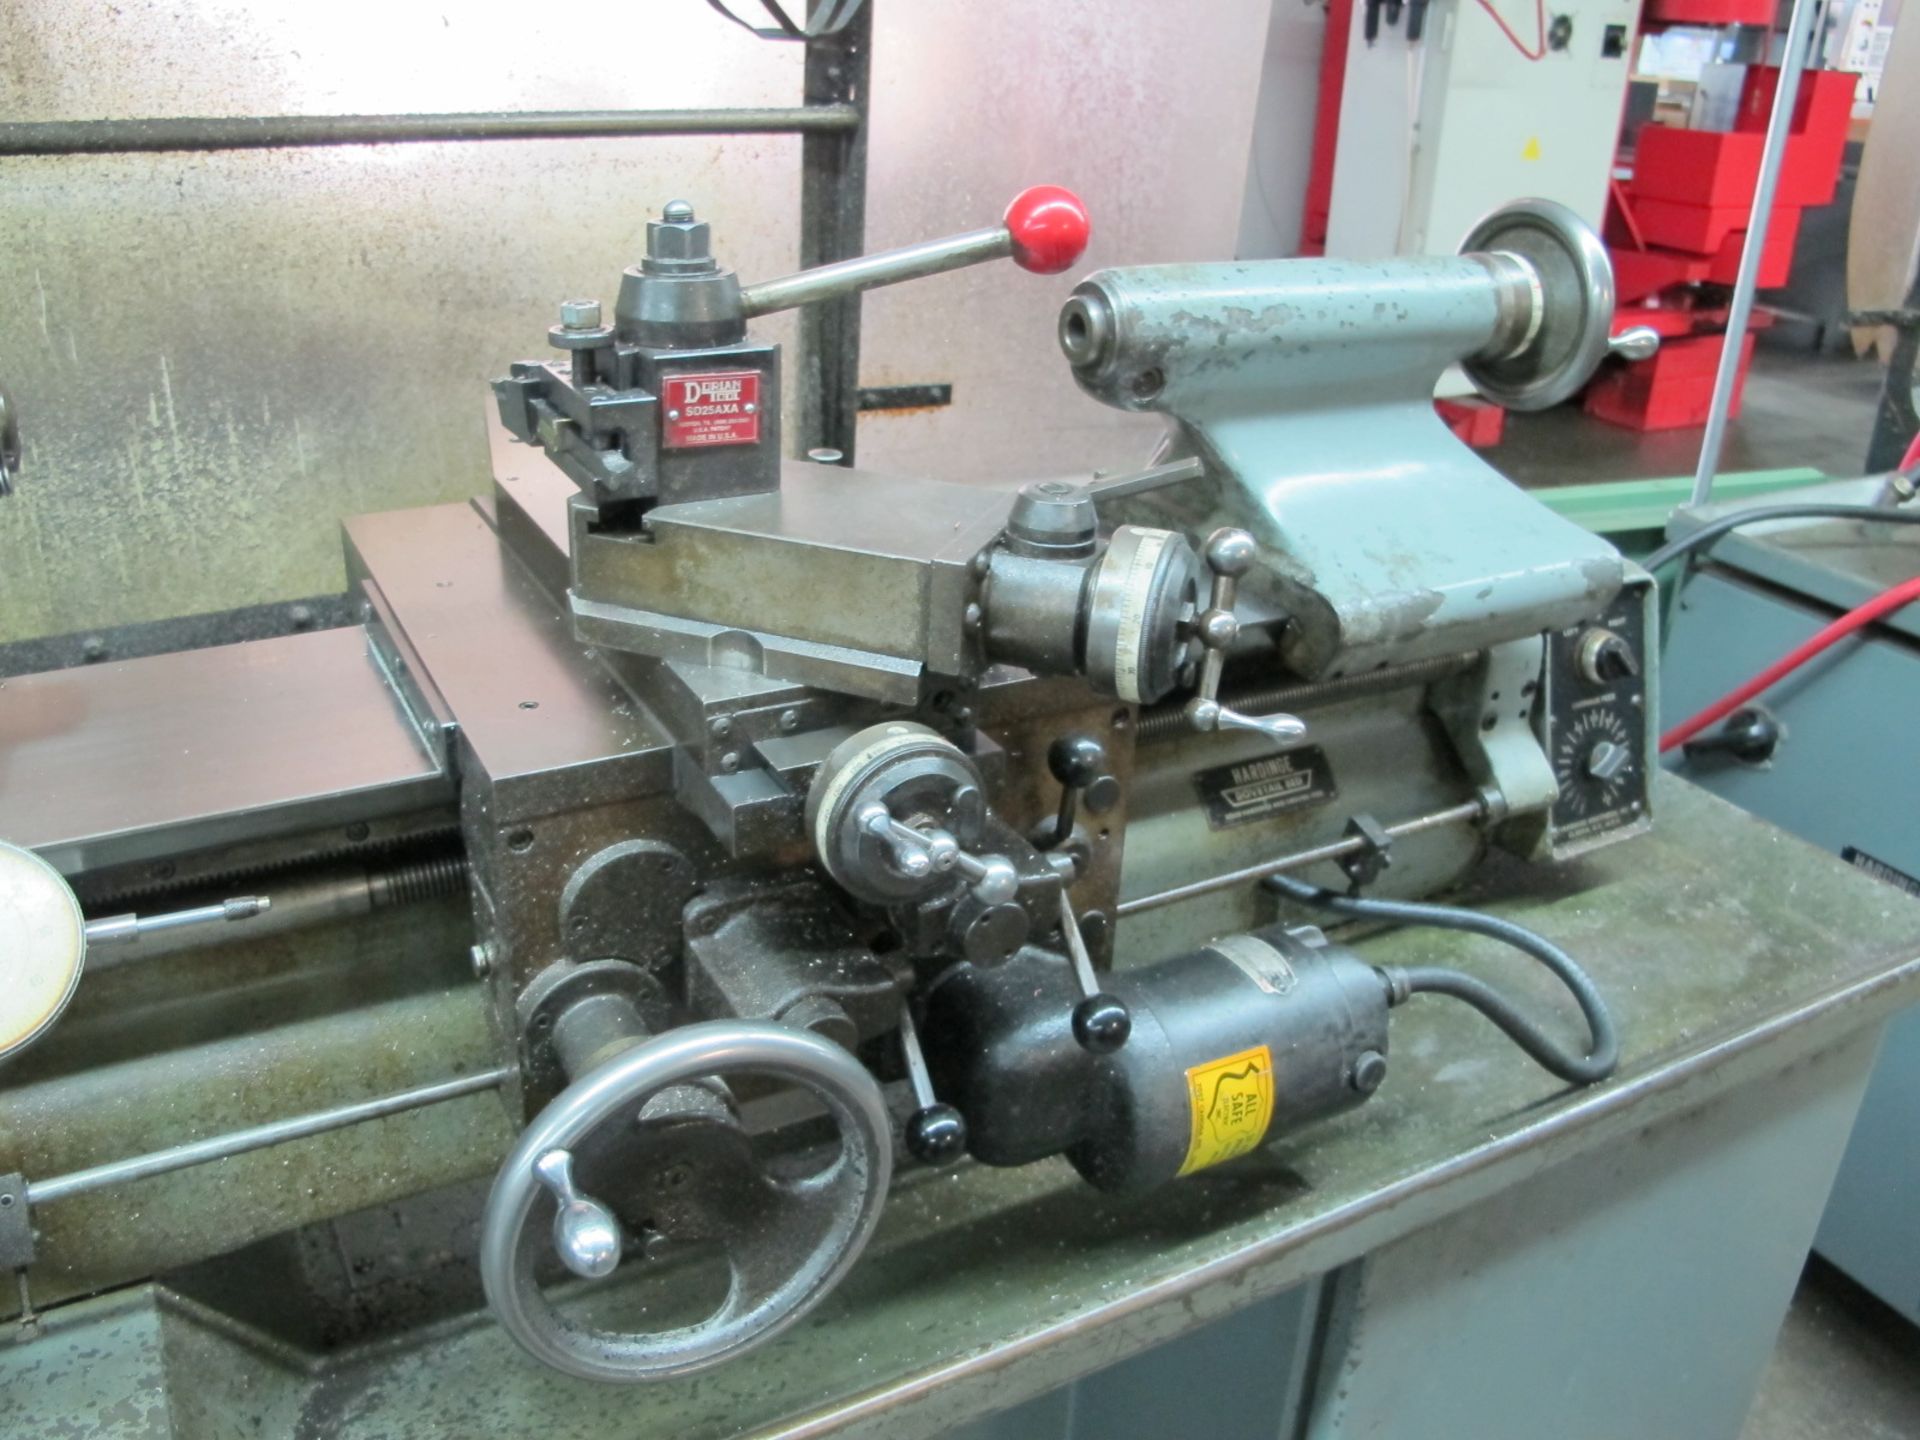 Hardinge HLV-H Wide Bed Tool Room Lathe s/n HLV-H-5225-K w/ 125-3000 RPM, Inch Threading, Tailstock, - Image 4 of 5